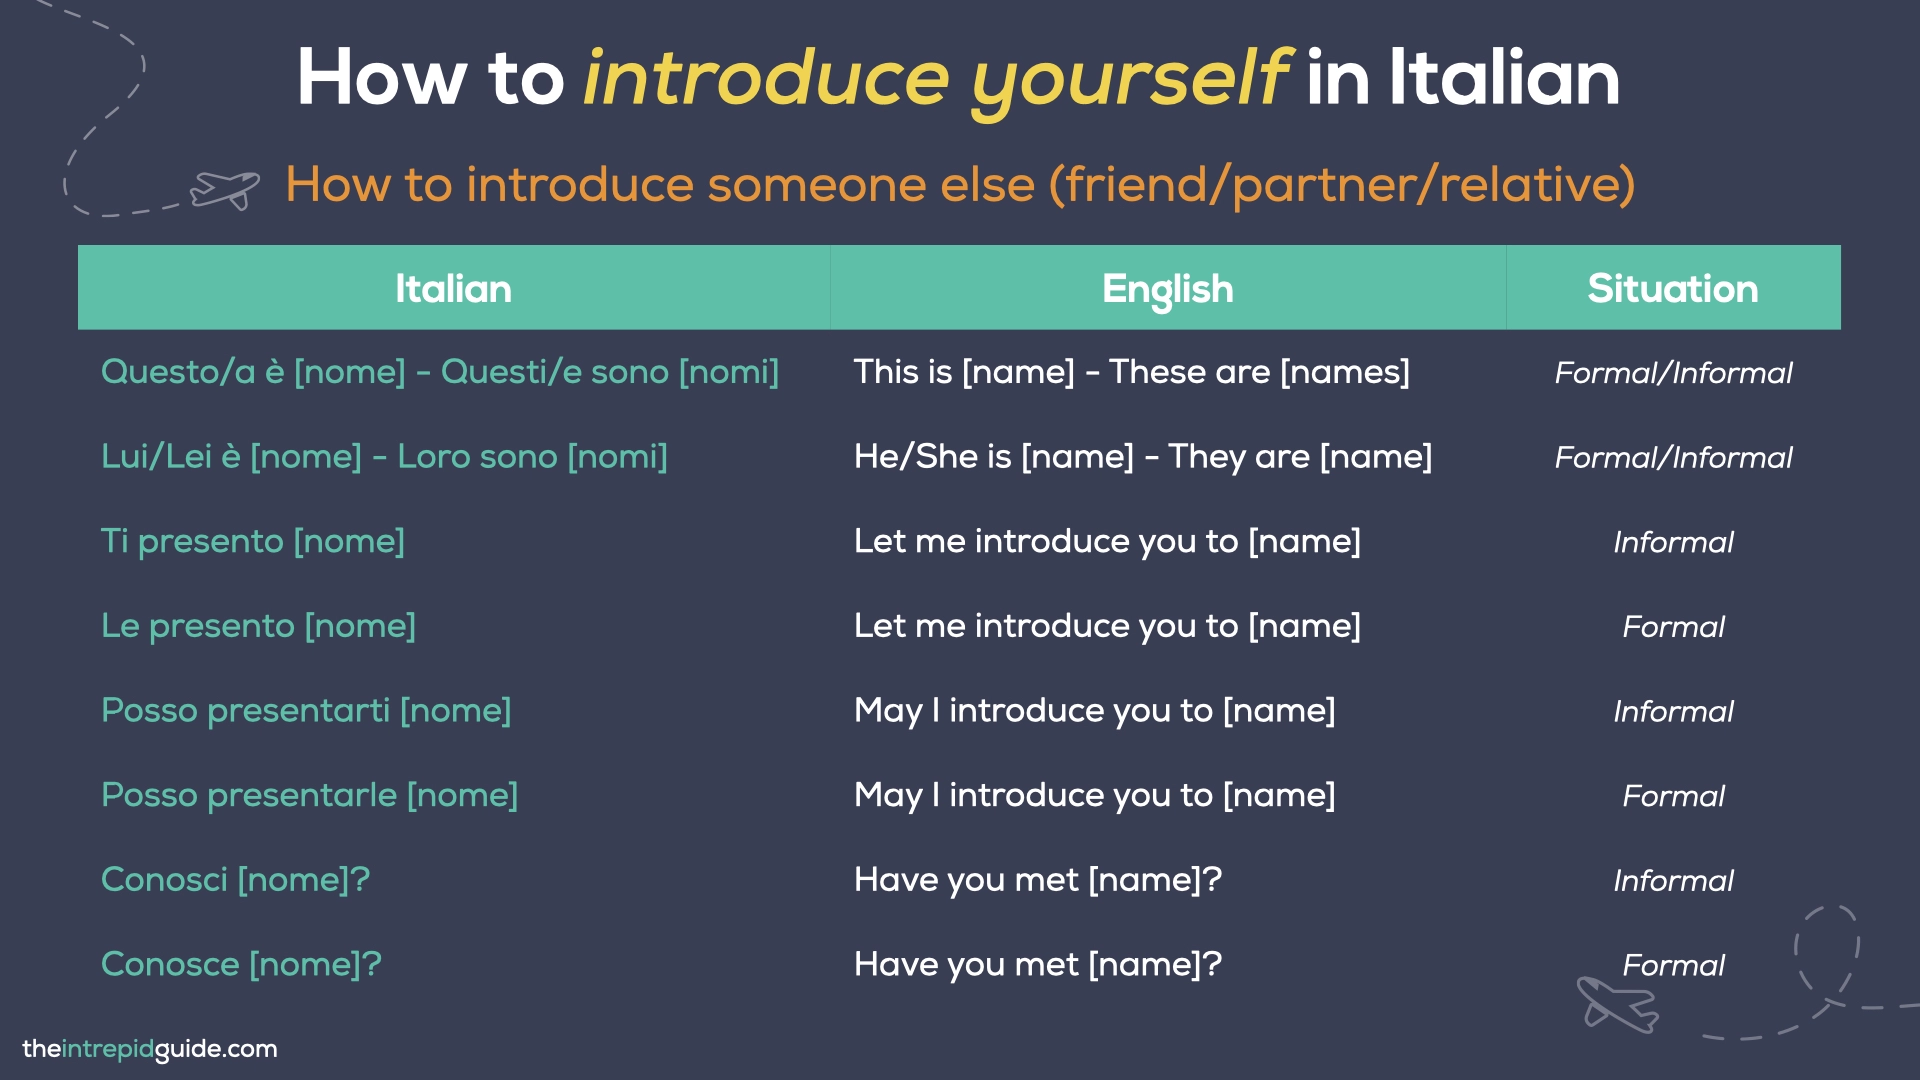 How to introduce yourself in Italian - How to introduce someone else in Italian